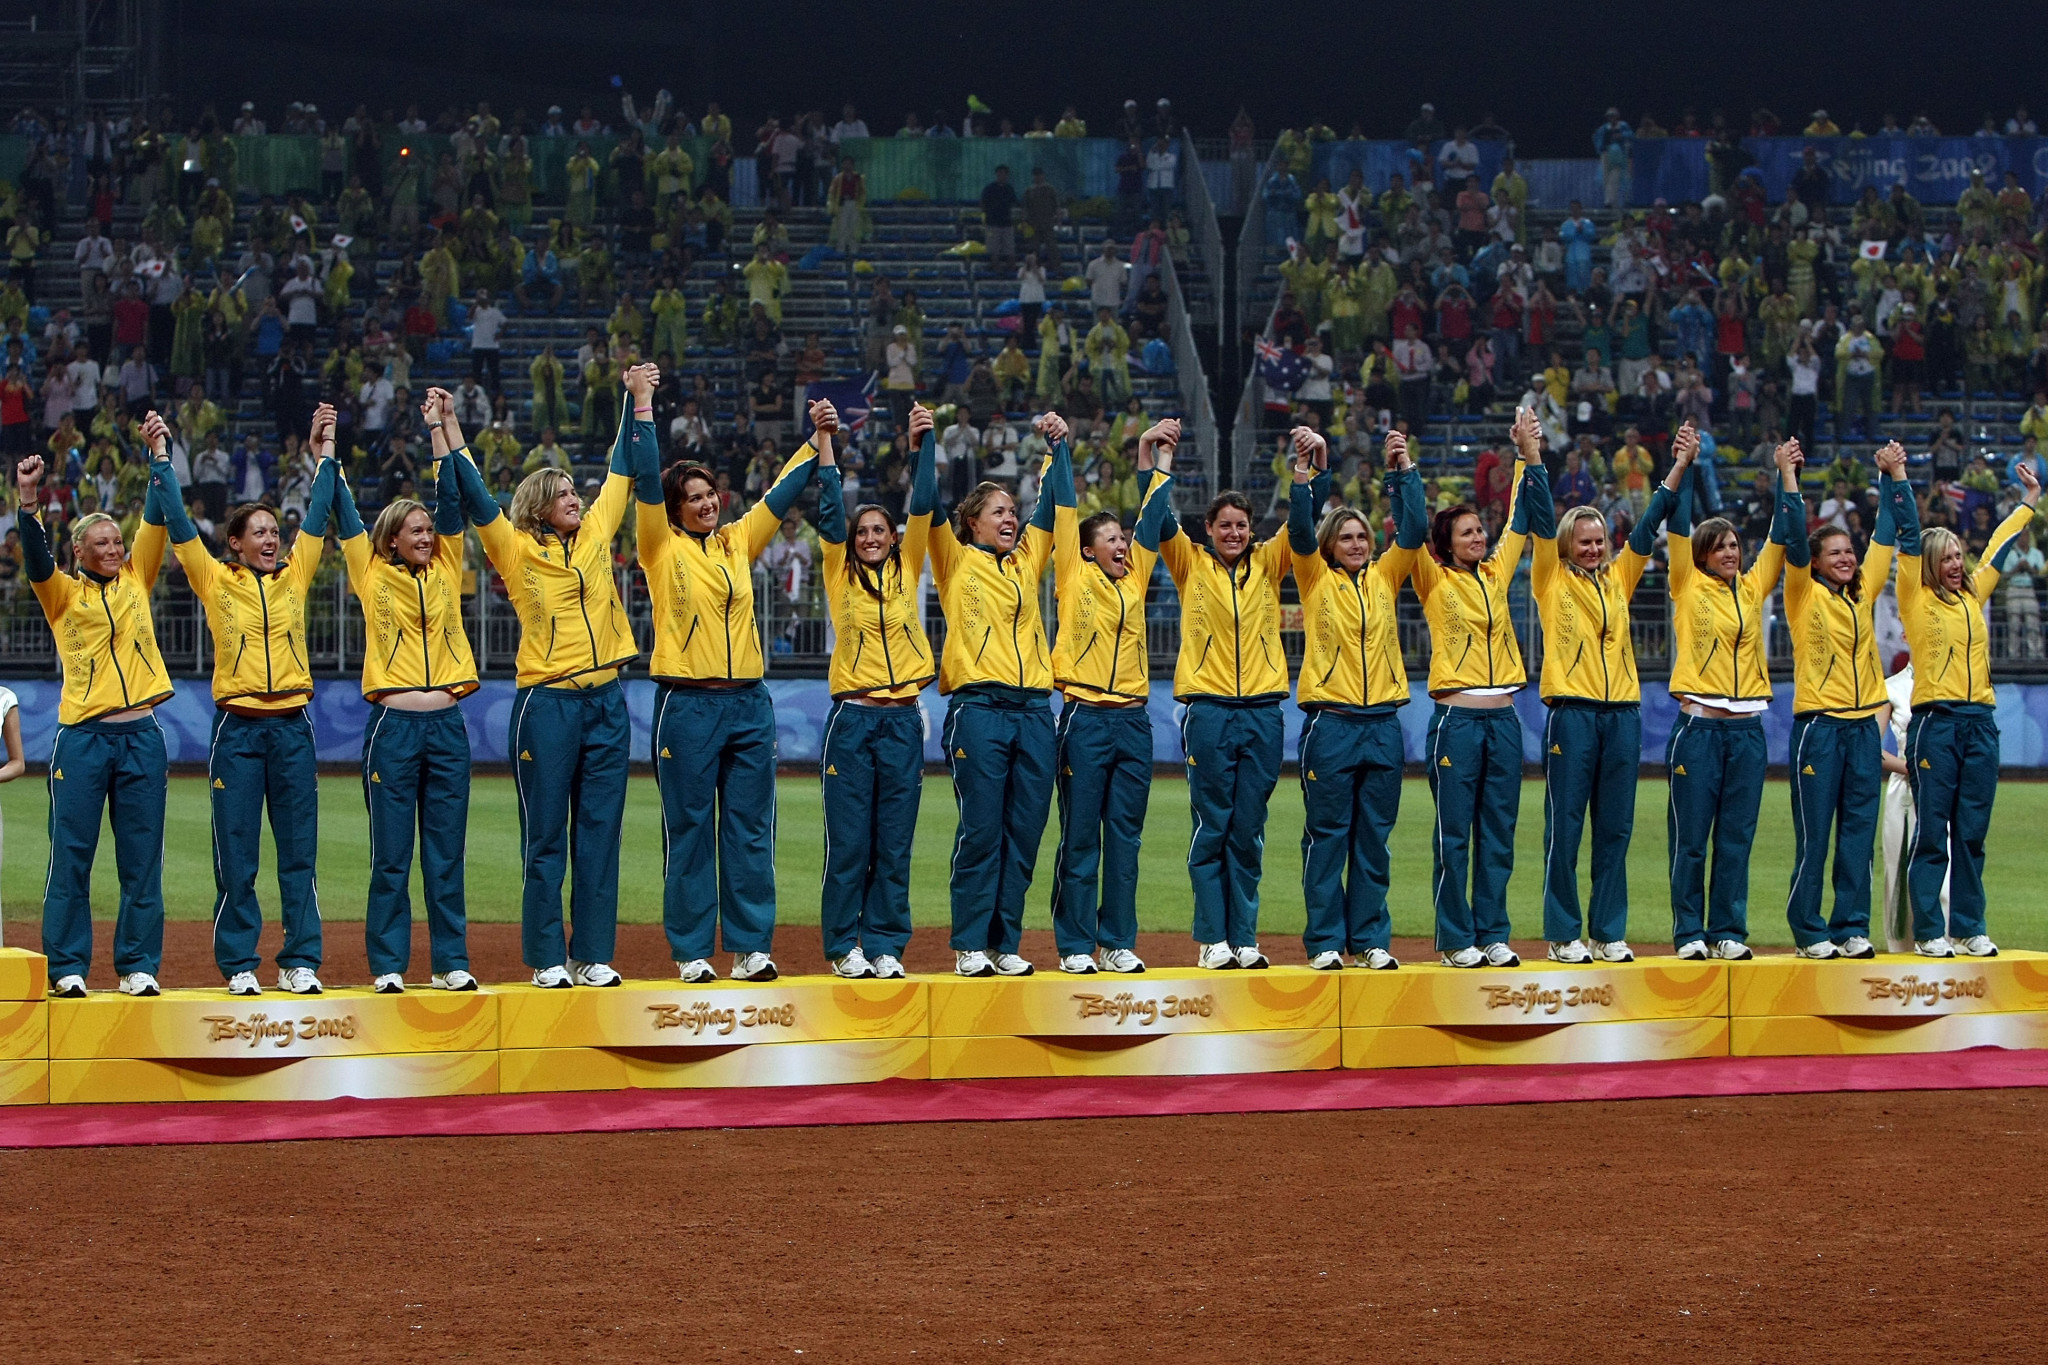 Australia has medalled on every occasion that softball has featured at the Olympics - including a bronze at Beijing 2008 ©Getty Images